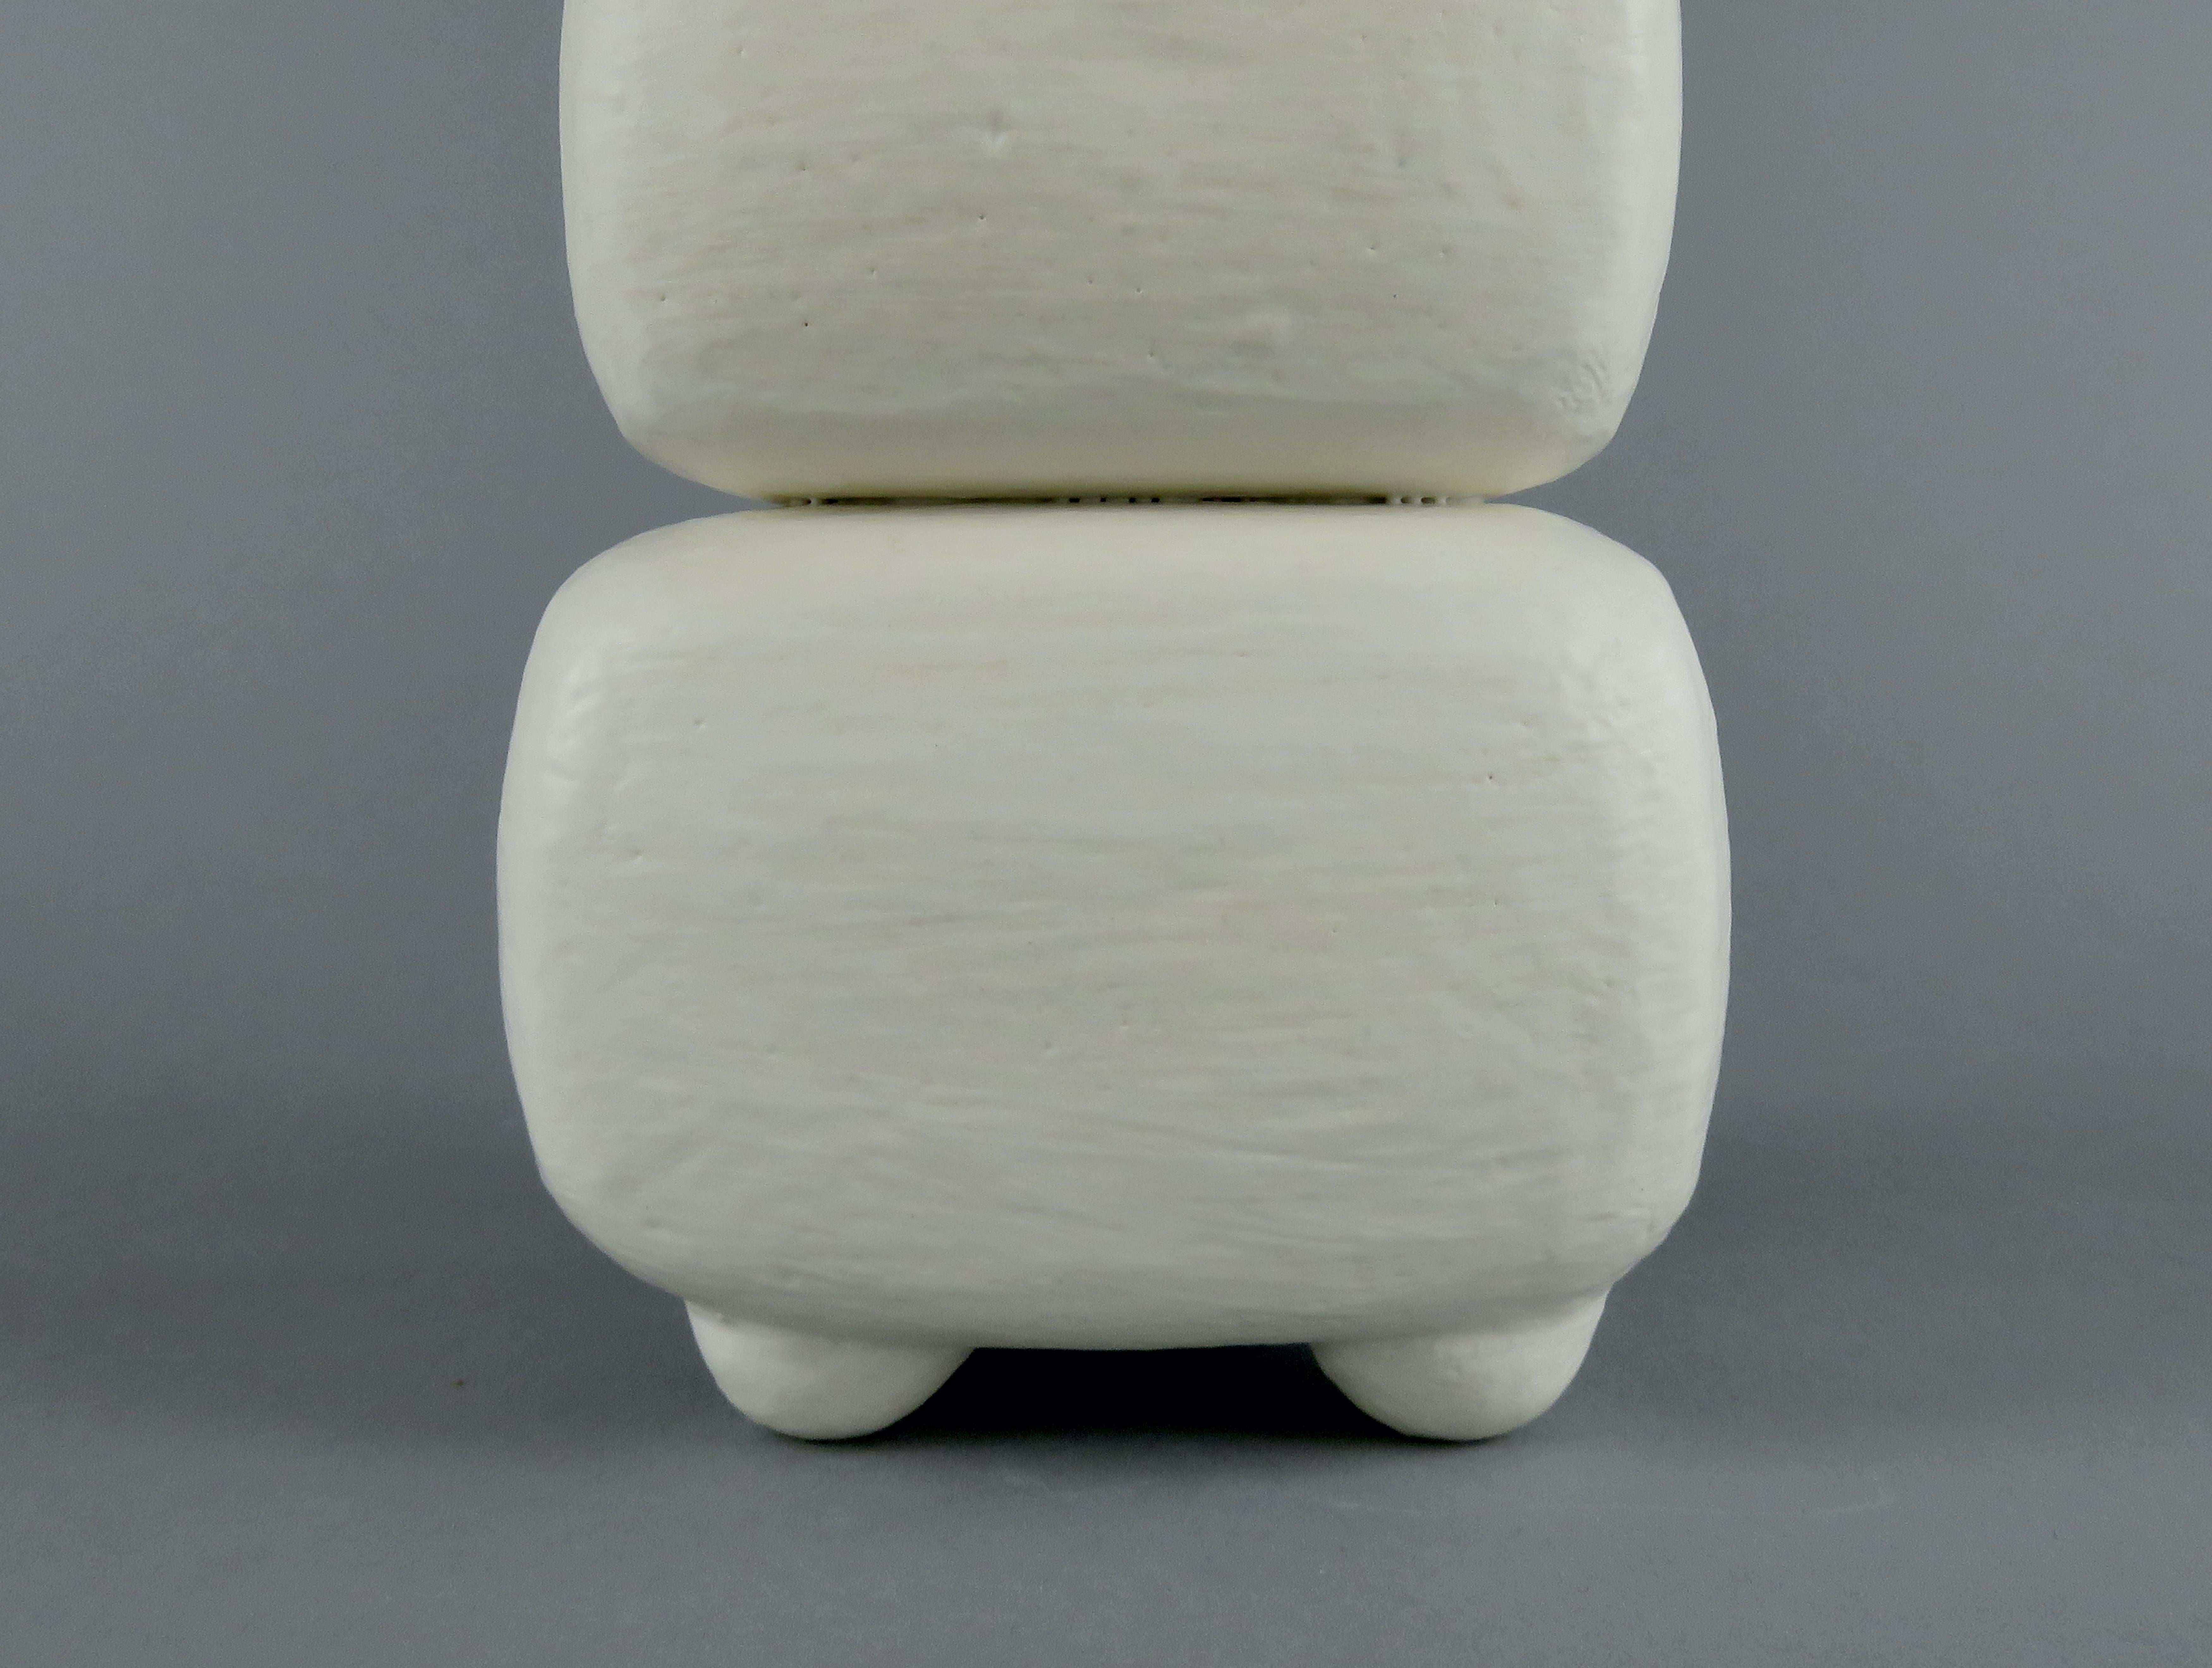 Creamy White 3-Part Totem, Rectangular Cup on Top, Hand Built Ceramic Sculpture For Sale 4